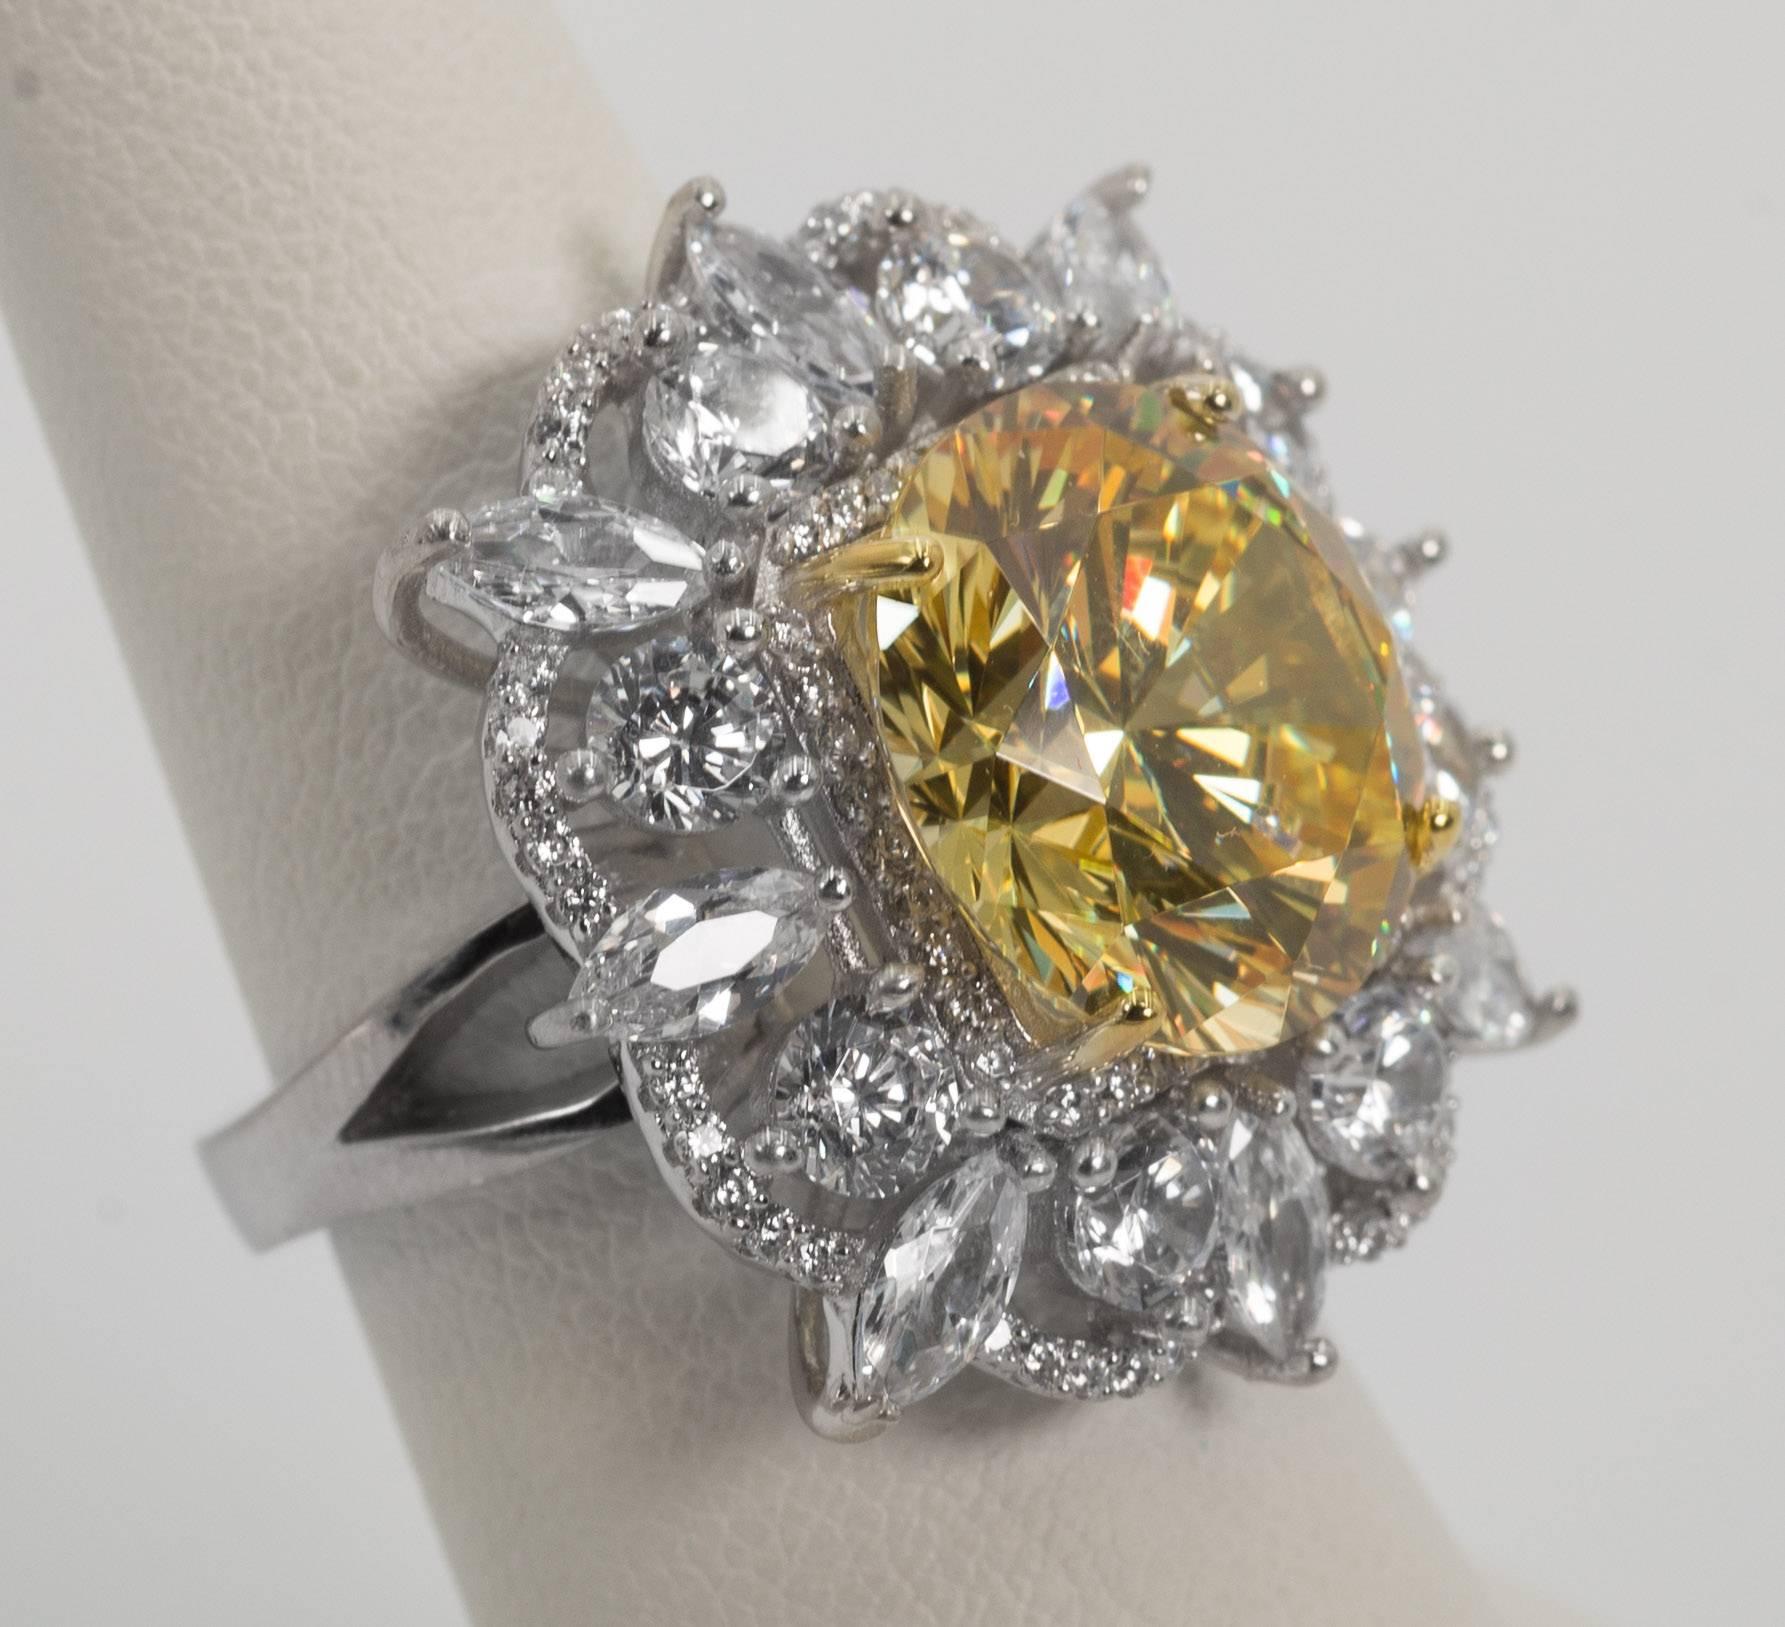 A 15 carat fancy intense canary yellow hand special cut round cubic zirconia nestled amongst fancy cut white faux diamonds set in sterling designed to the highest fine standards possible. A classic amazing sparkly and brilliant look that will last